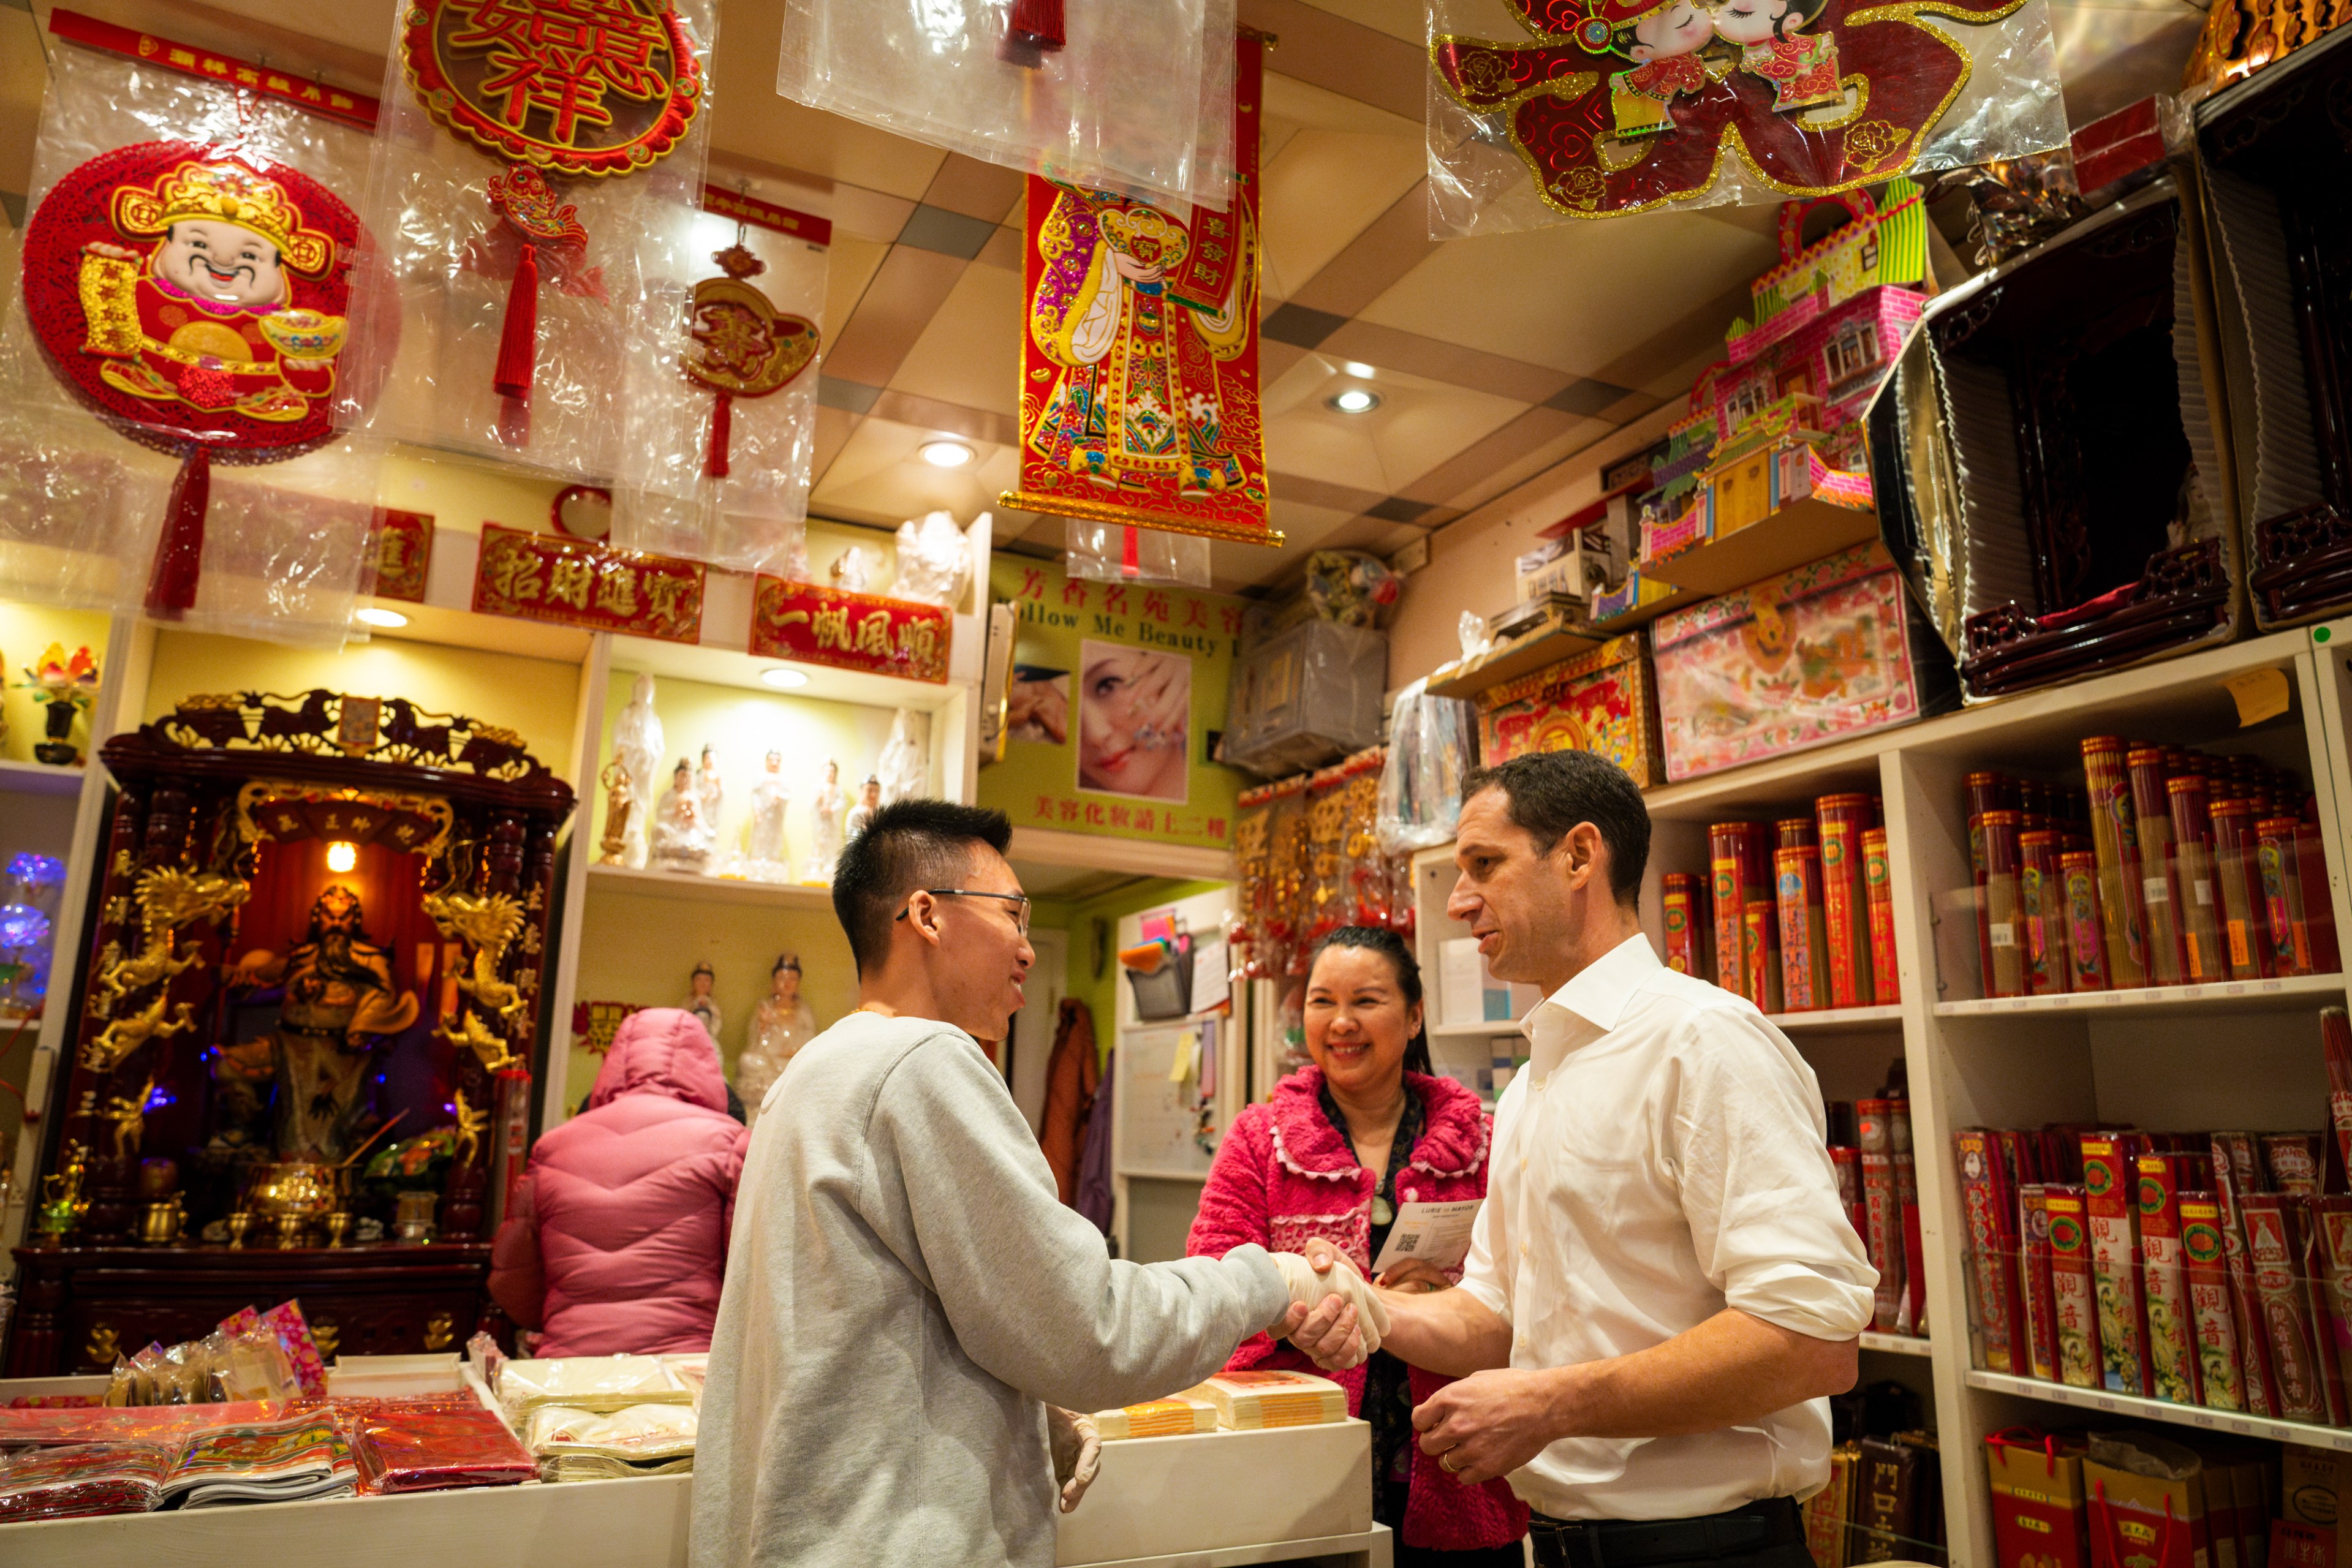 A vibrant shop with people, Chinese decorations, and altar. Two individuals engage in a handshake.